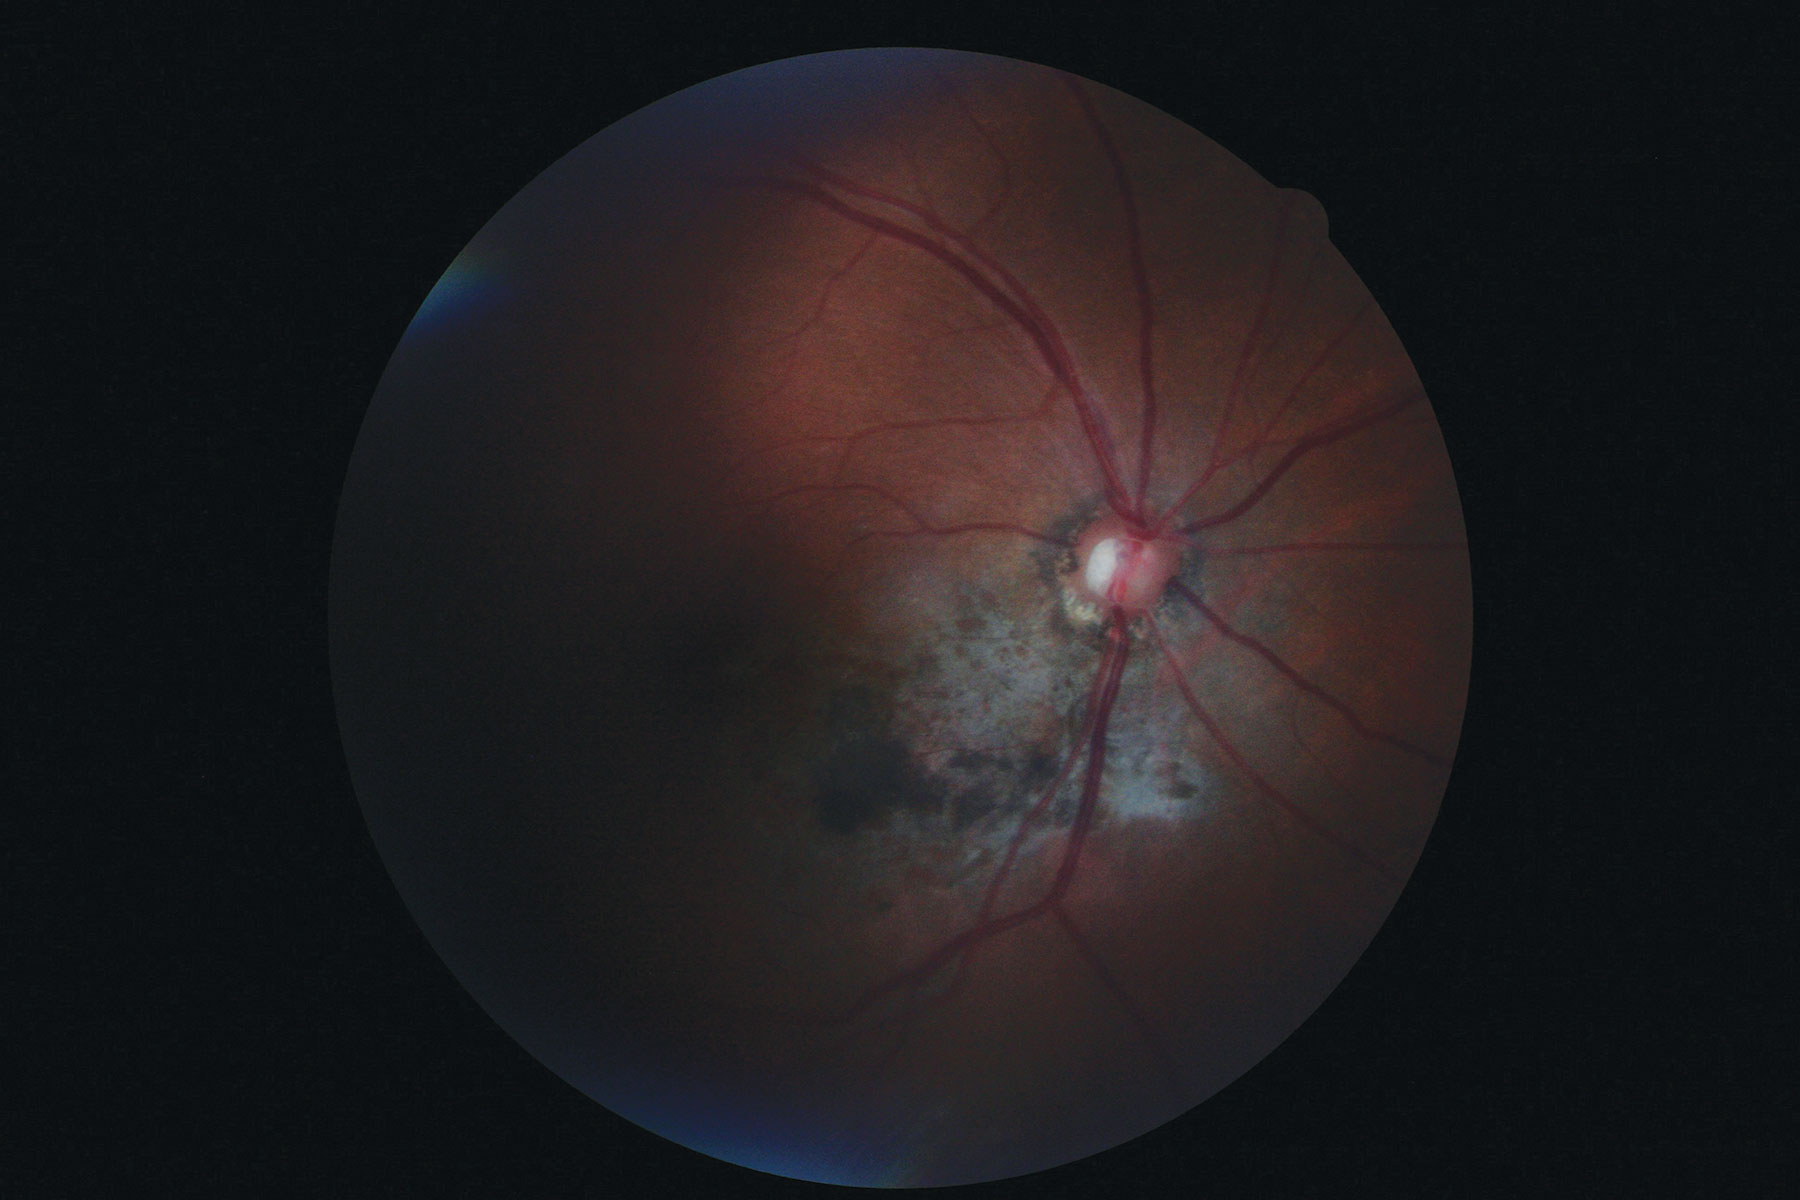 Dilated fundus exam of the patient revealed the findings shown here. In what way might they relate to the incident (an auto accident) she described upon presentation?